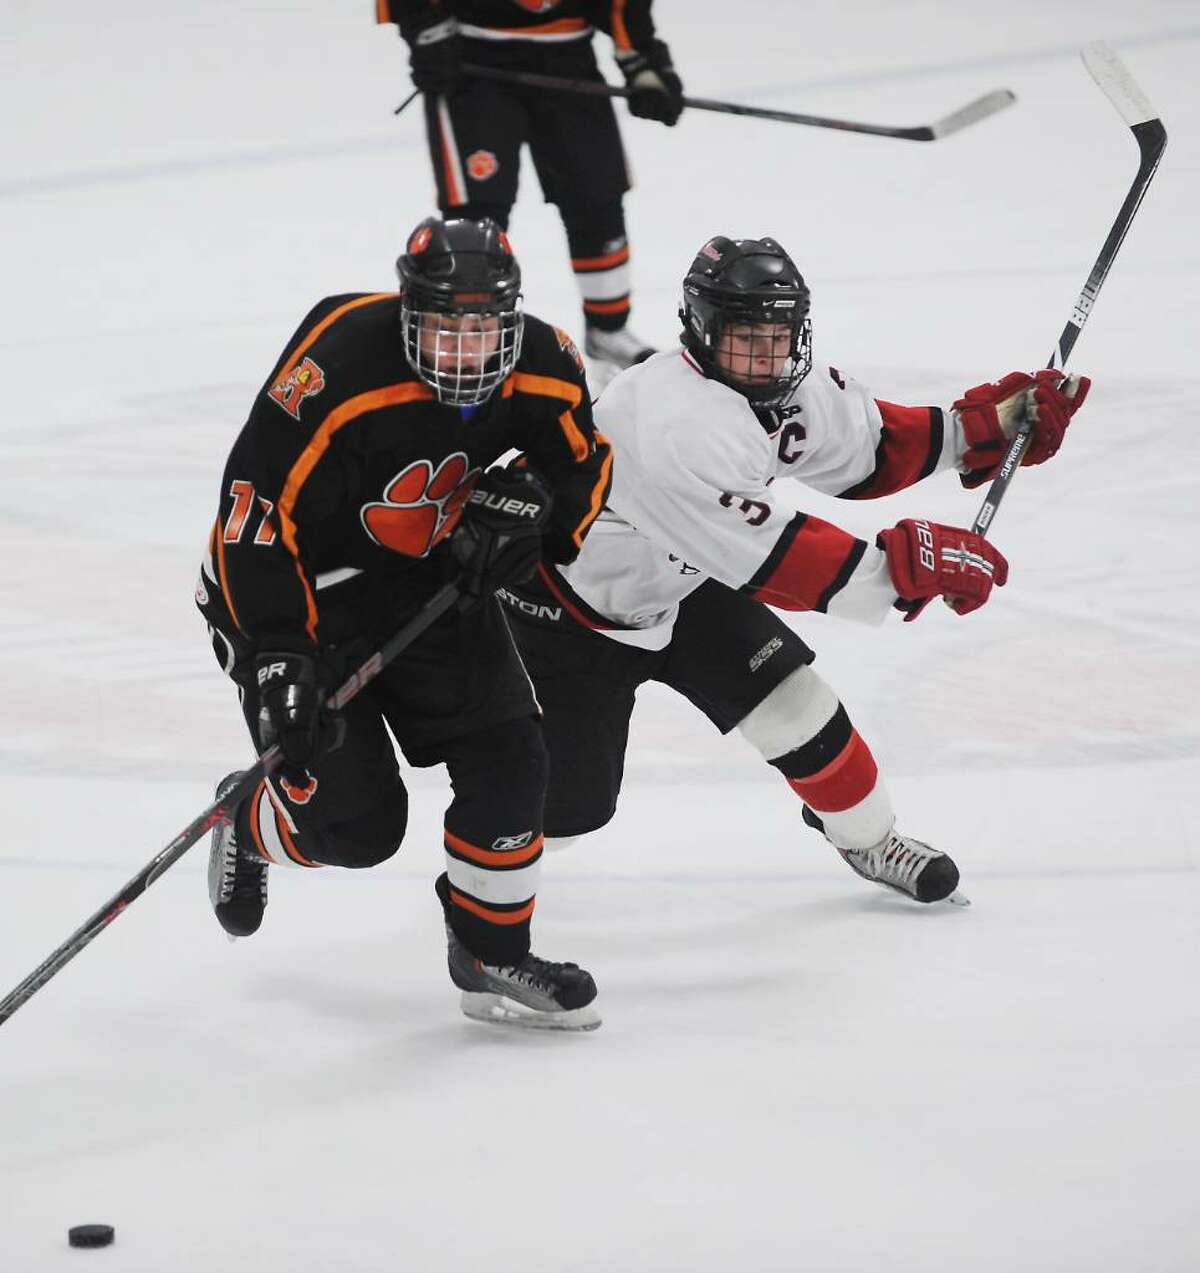 Ridgefield's Chas South is pressured by New Canaan's Andrew Leslie in the FCIAC boys hockey championship game at Terry Conners Rink in Stamford, Conn. on Saturday, March 6, 2010.